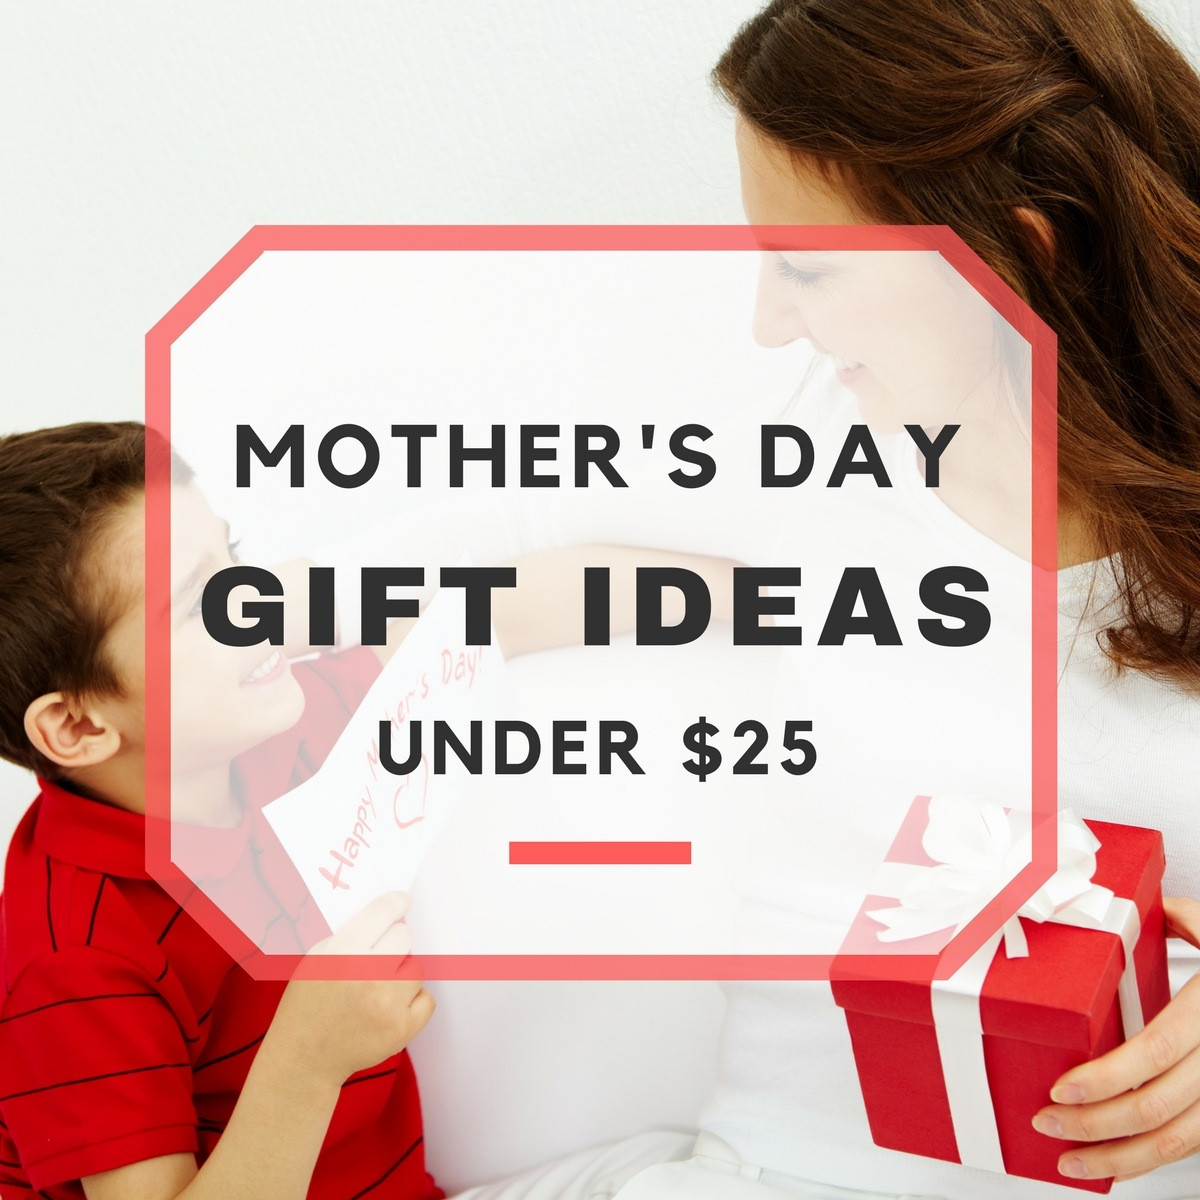 Good Mothers Day Ideas
 10 Good Mother s Day Gift Ideas Under $25